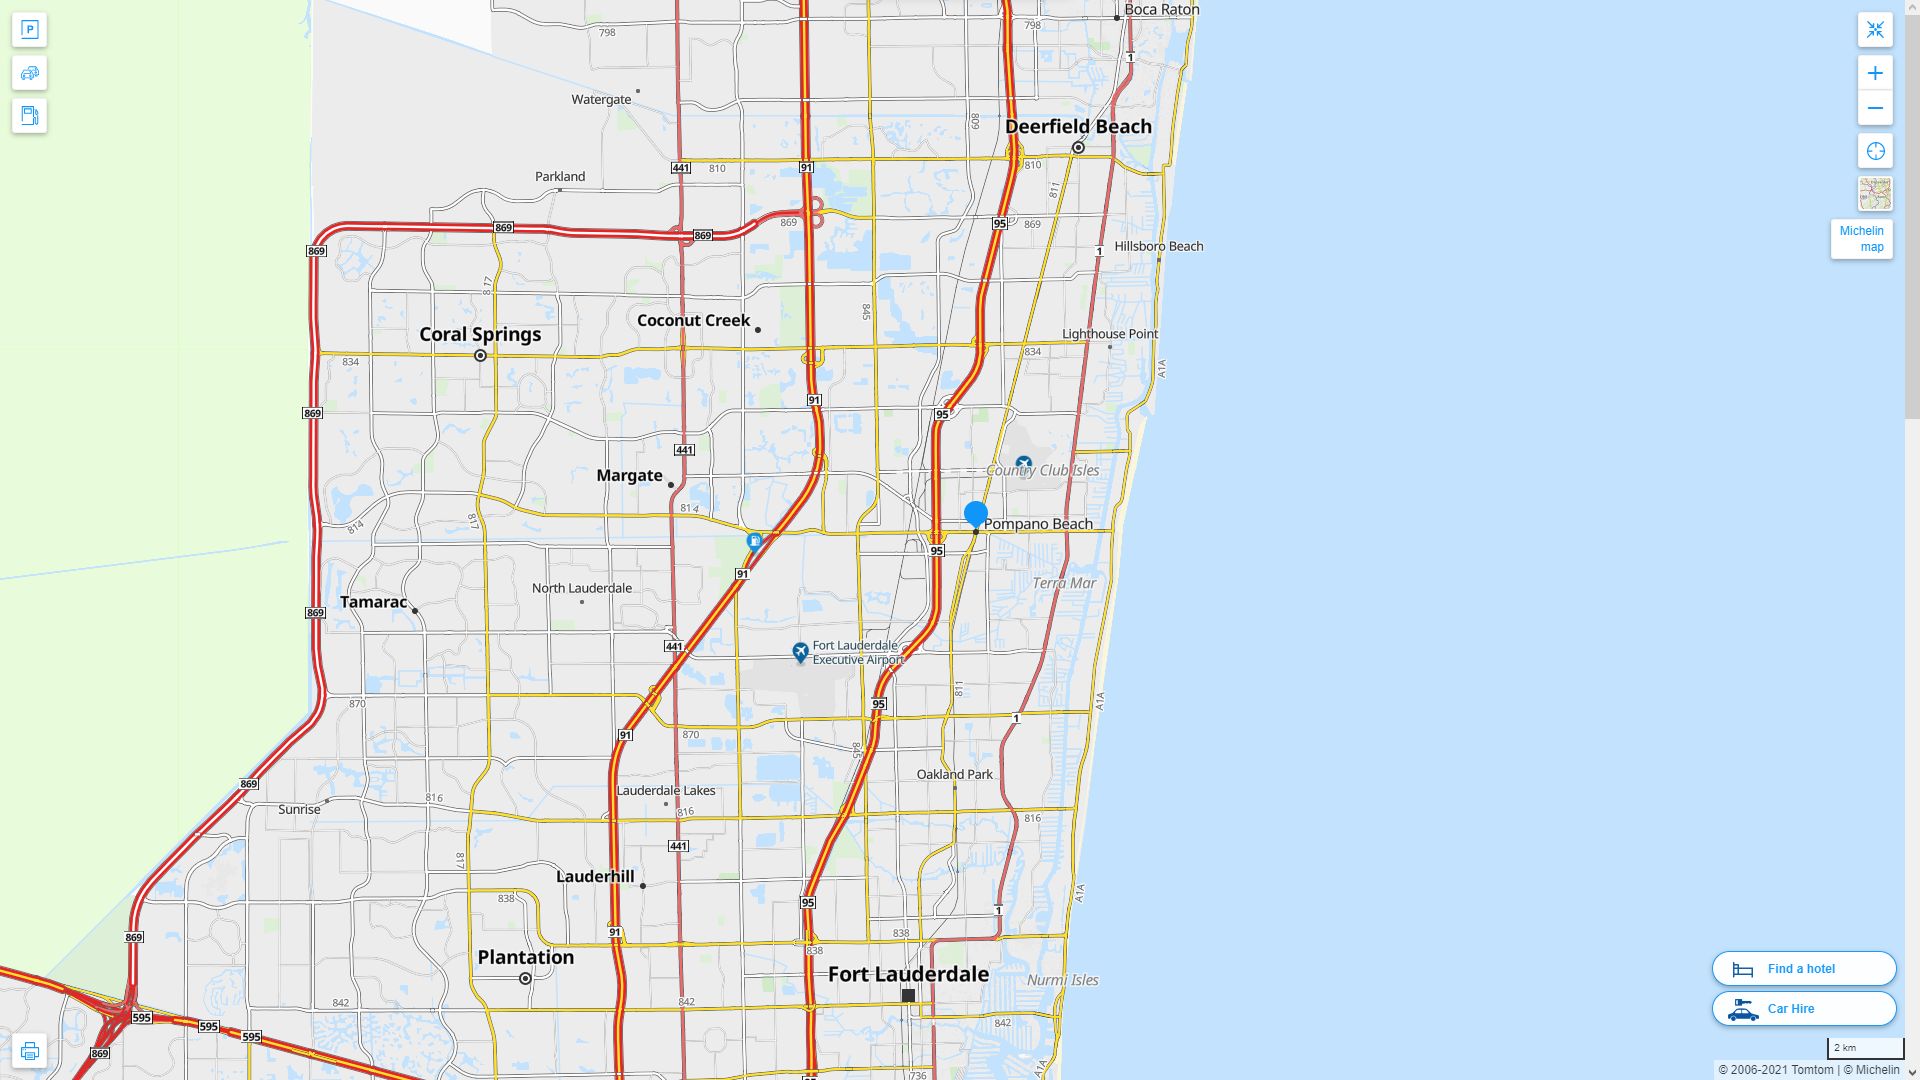 Pompano Beach Florida Highway and Road Map